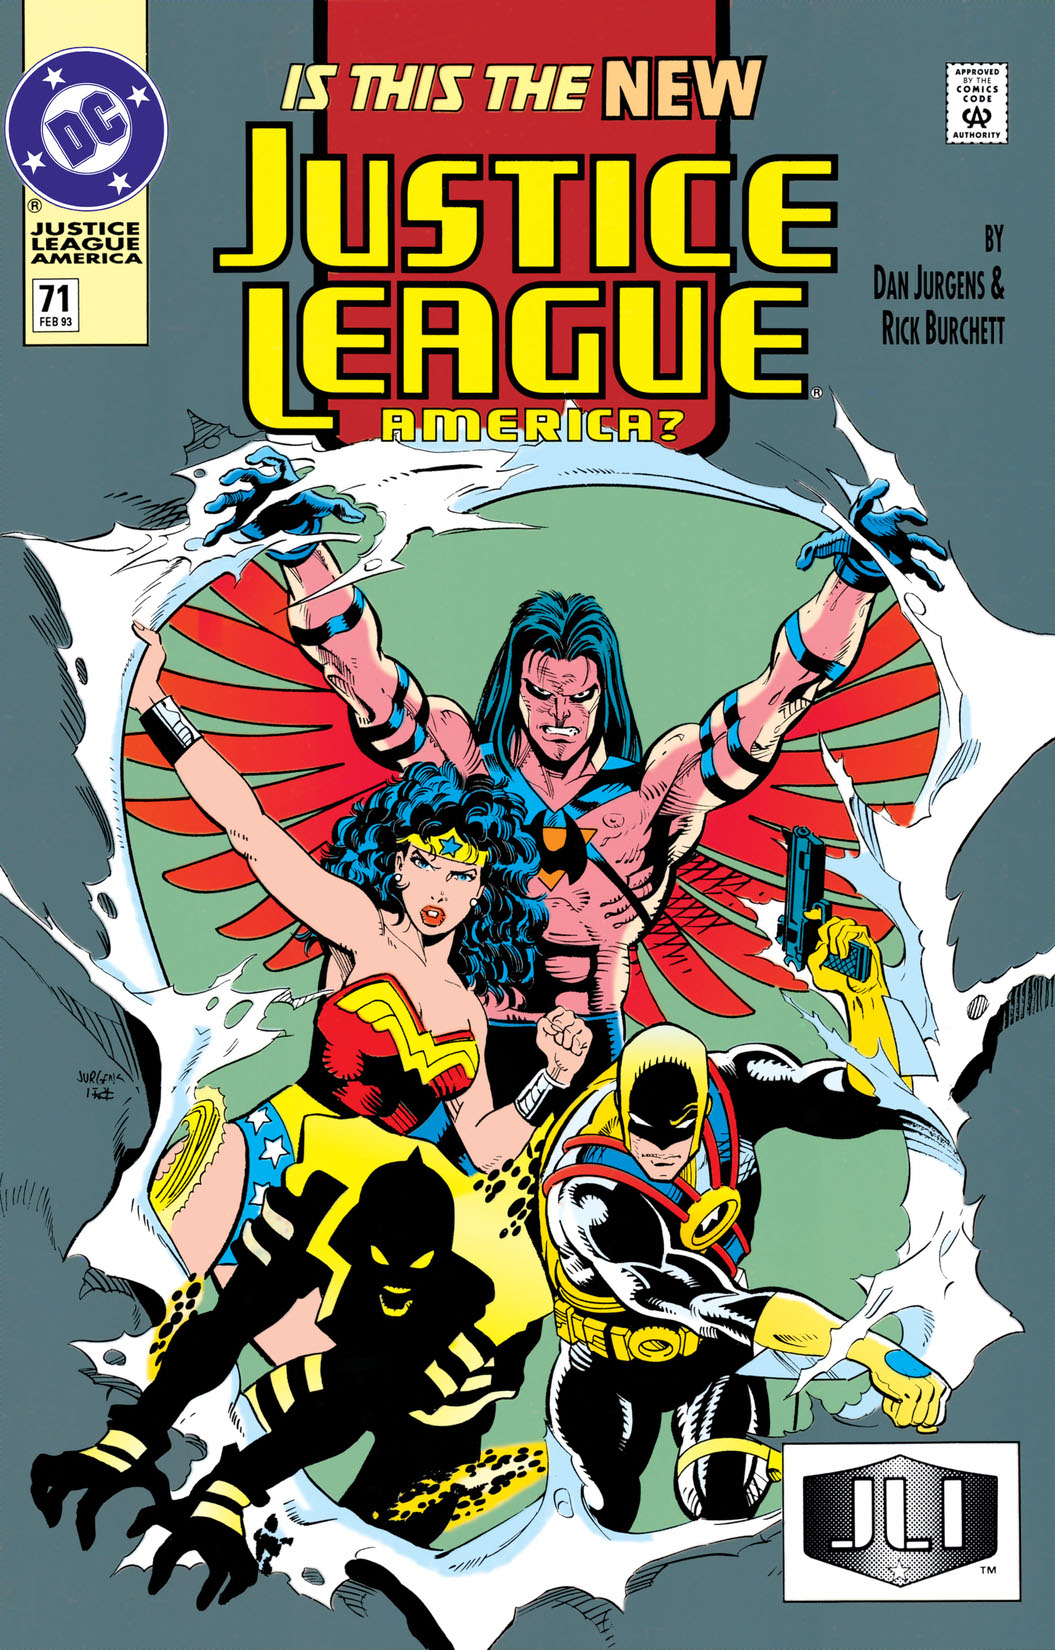 Justice League America (1987-1996) #71 preview images